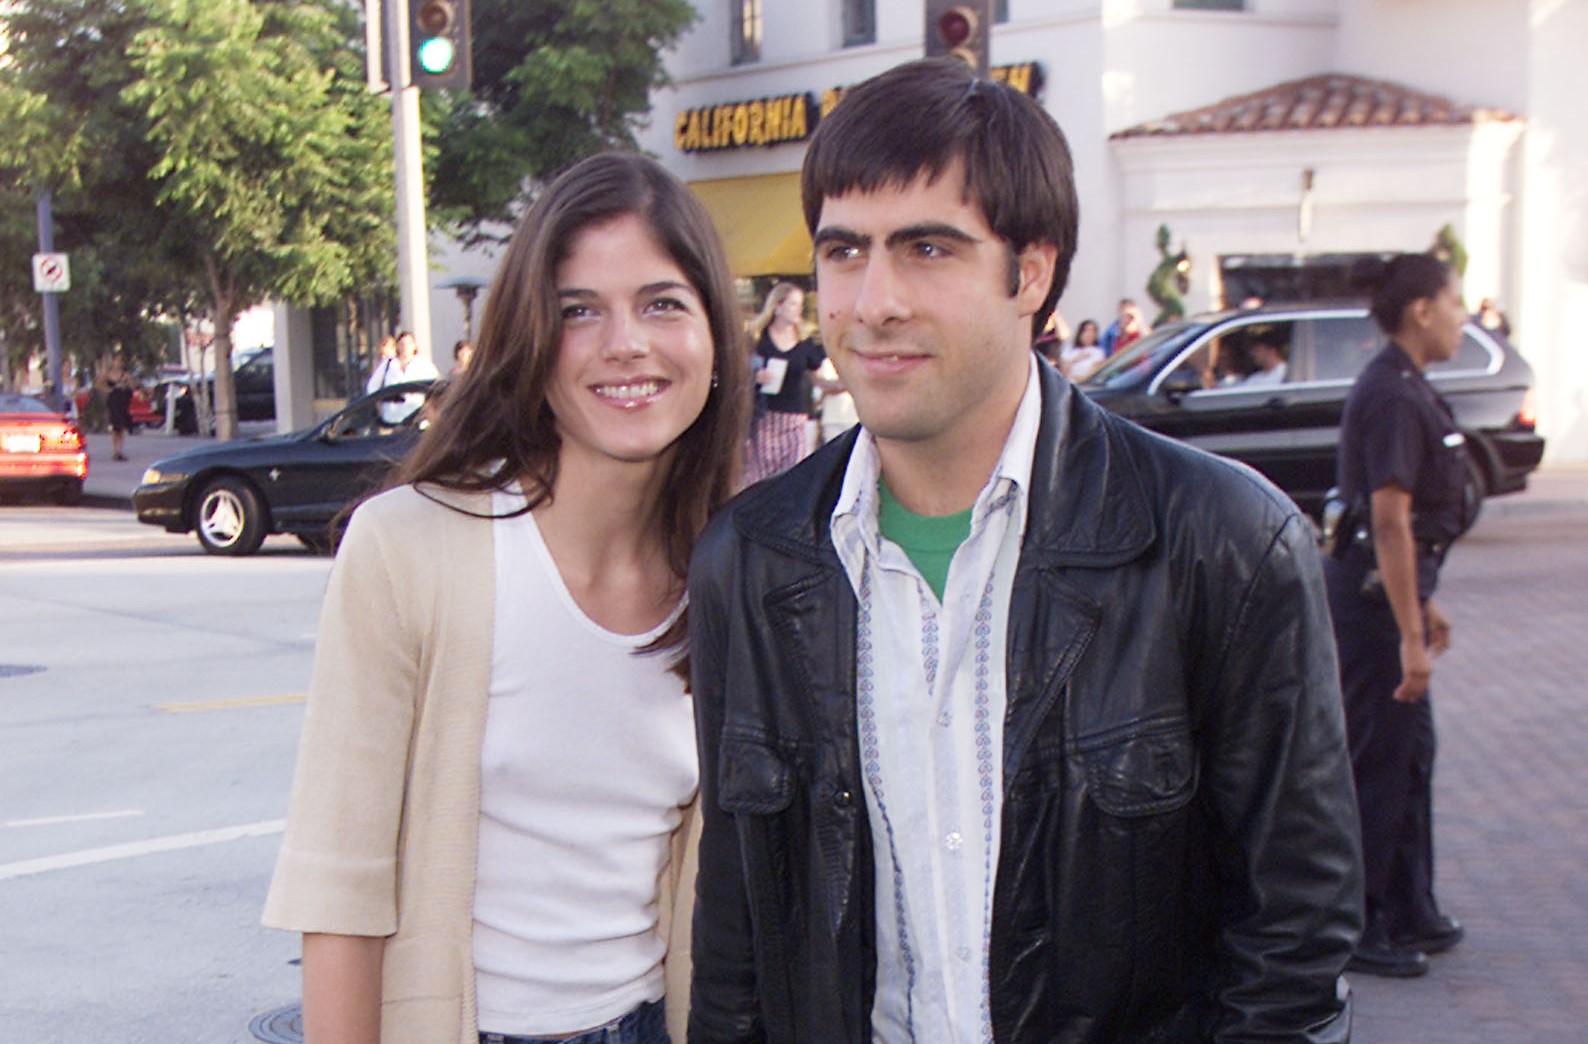 Selma Blair and Jason Schwartzman at the world premiere of 'The Replacements' in Los Angeles, on August 7, 2000. | Source: Getty Images